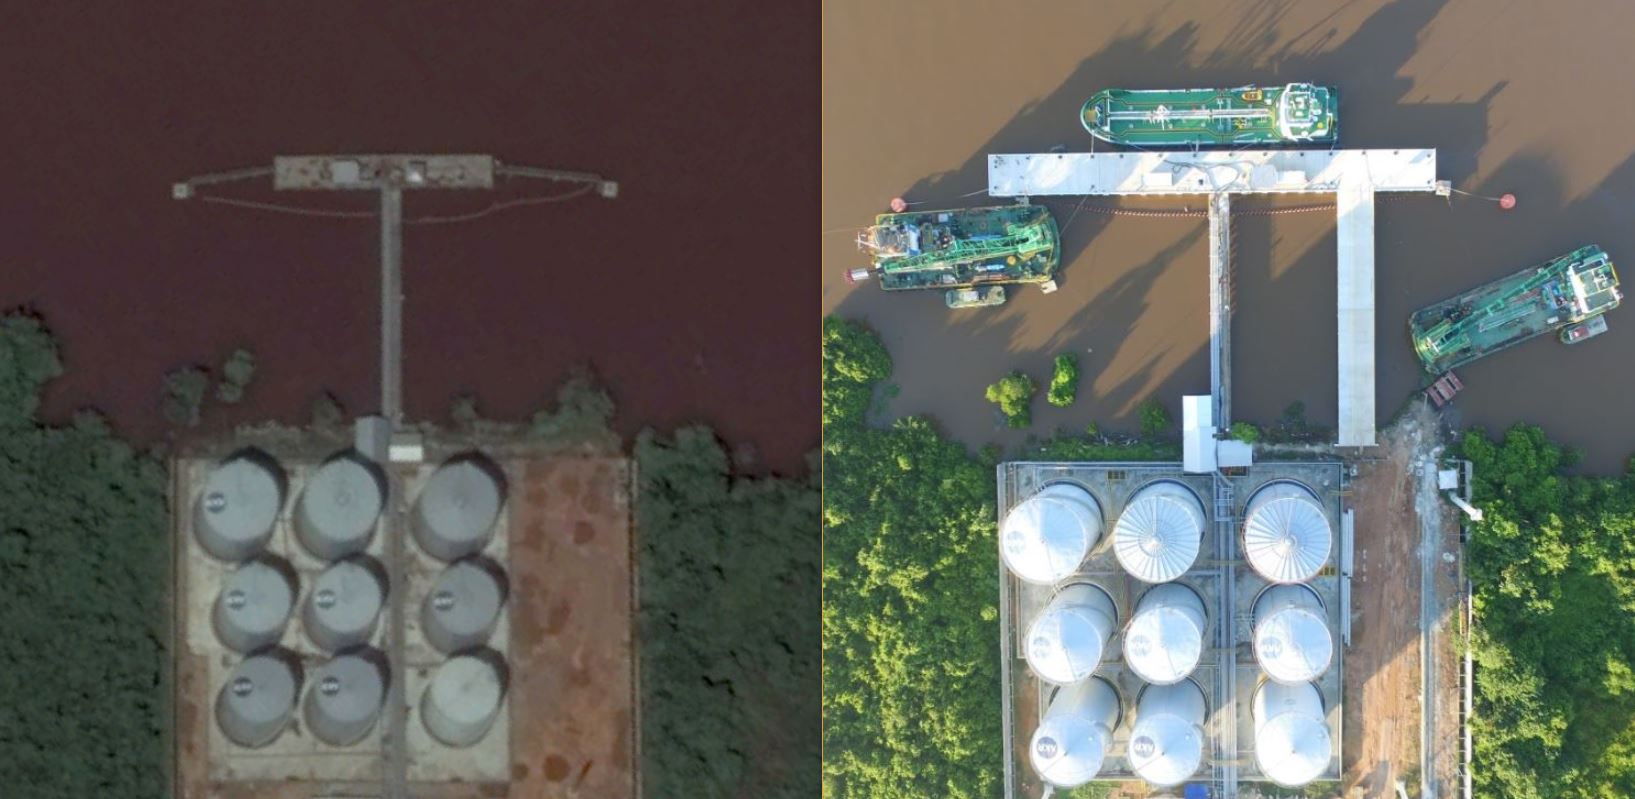 Aerial Photos of the Jetty Before and After Expansion